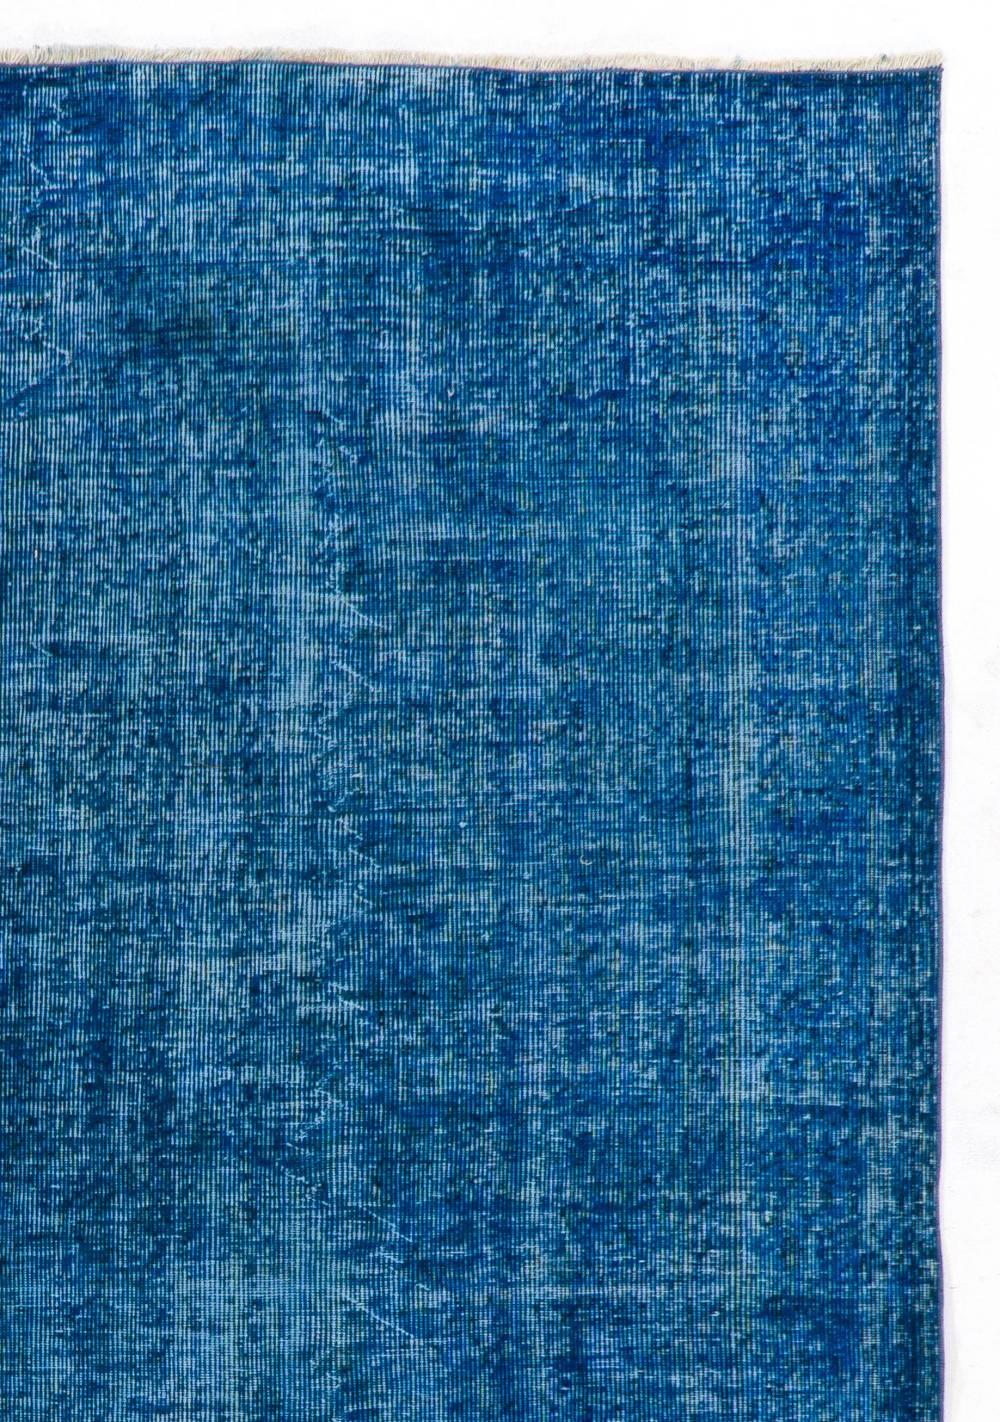 Hand-Woven 7x10 Ft Decorative Vintage Turkish Rug ReDyed in Blue Color for Modern Interiors